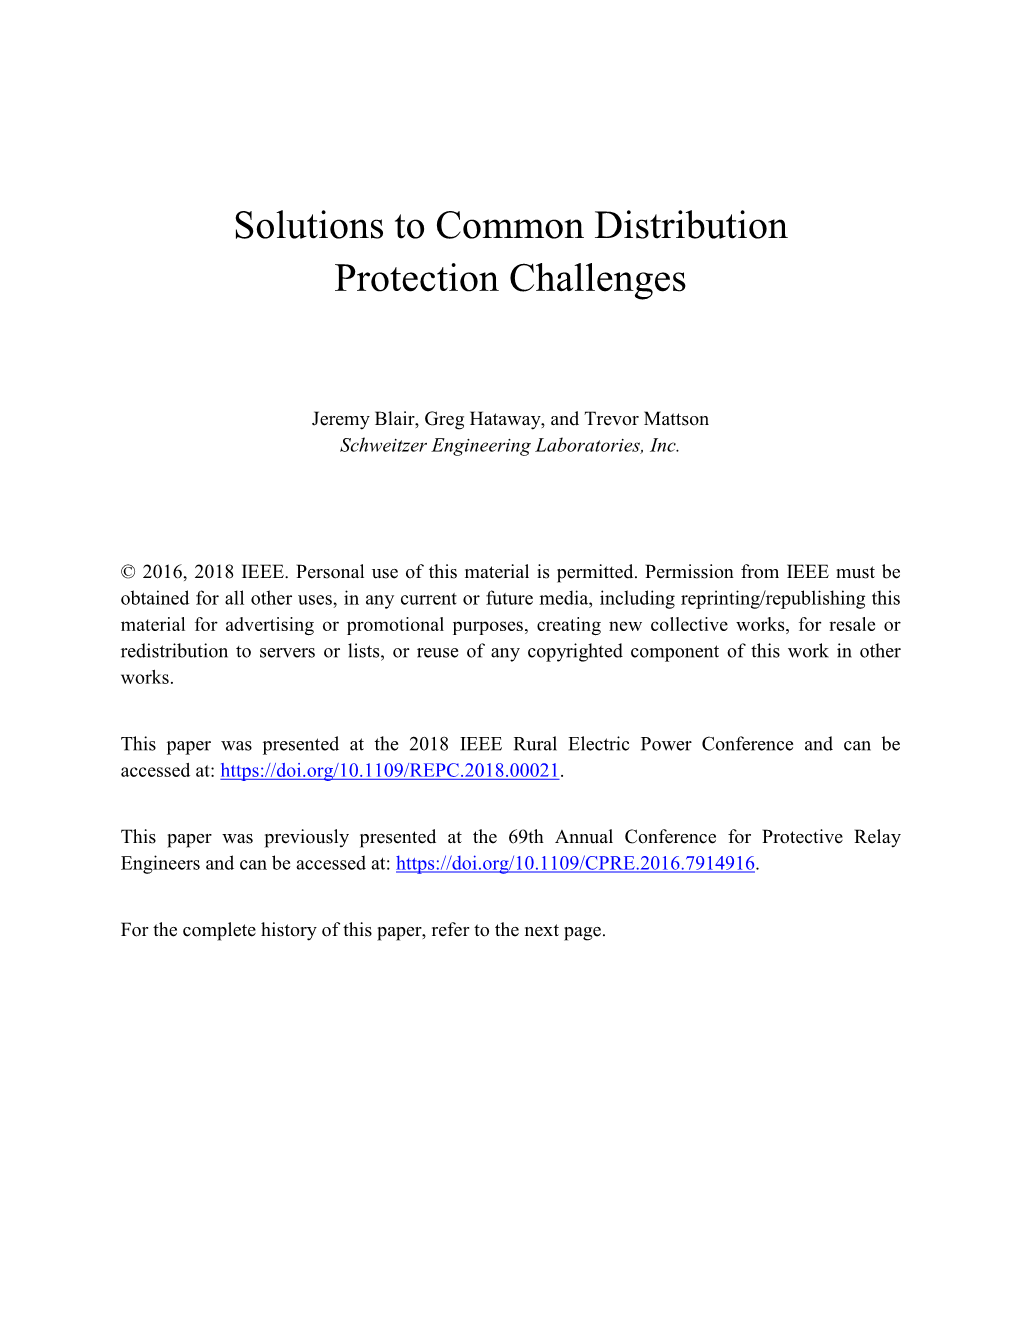 Solutions to Common Distribution Protection Challenges